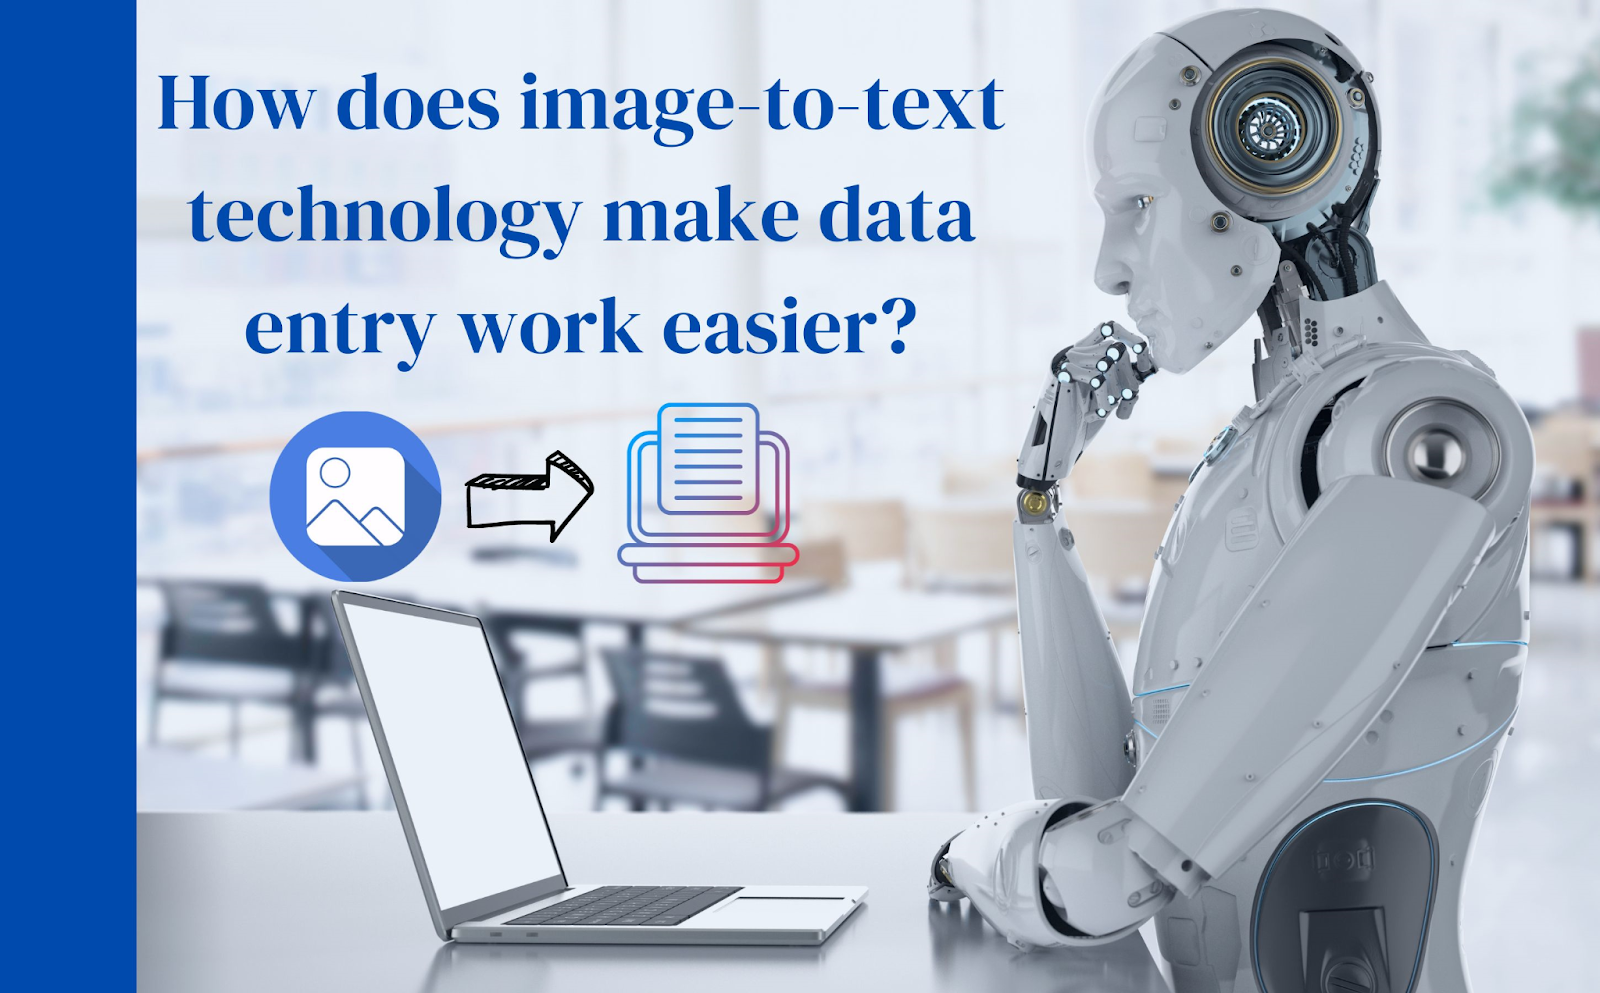 How does image-to-text technology make data entry work easier?